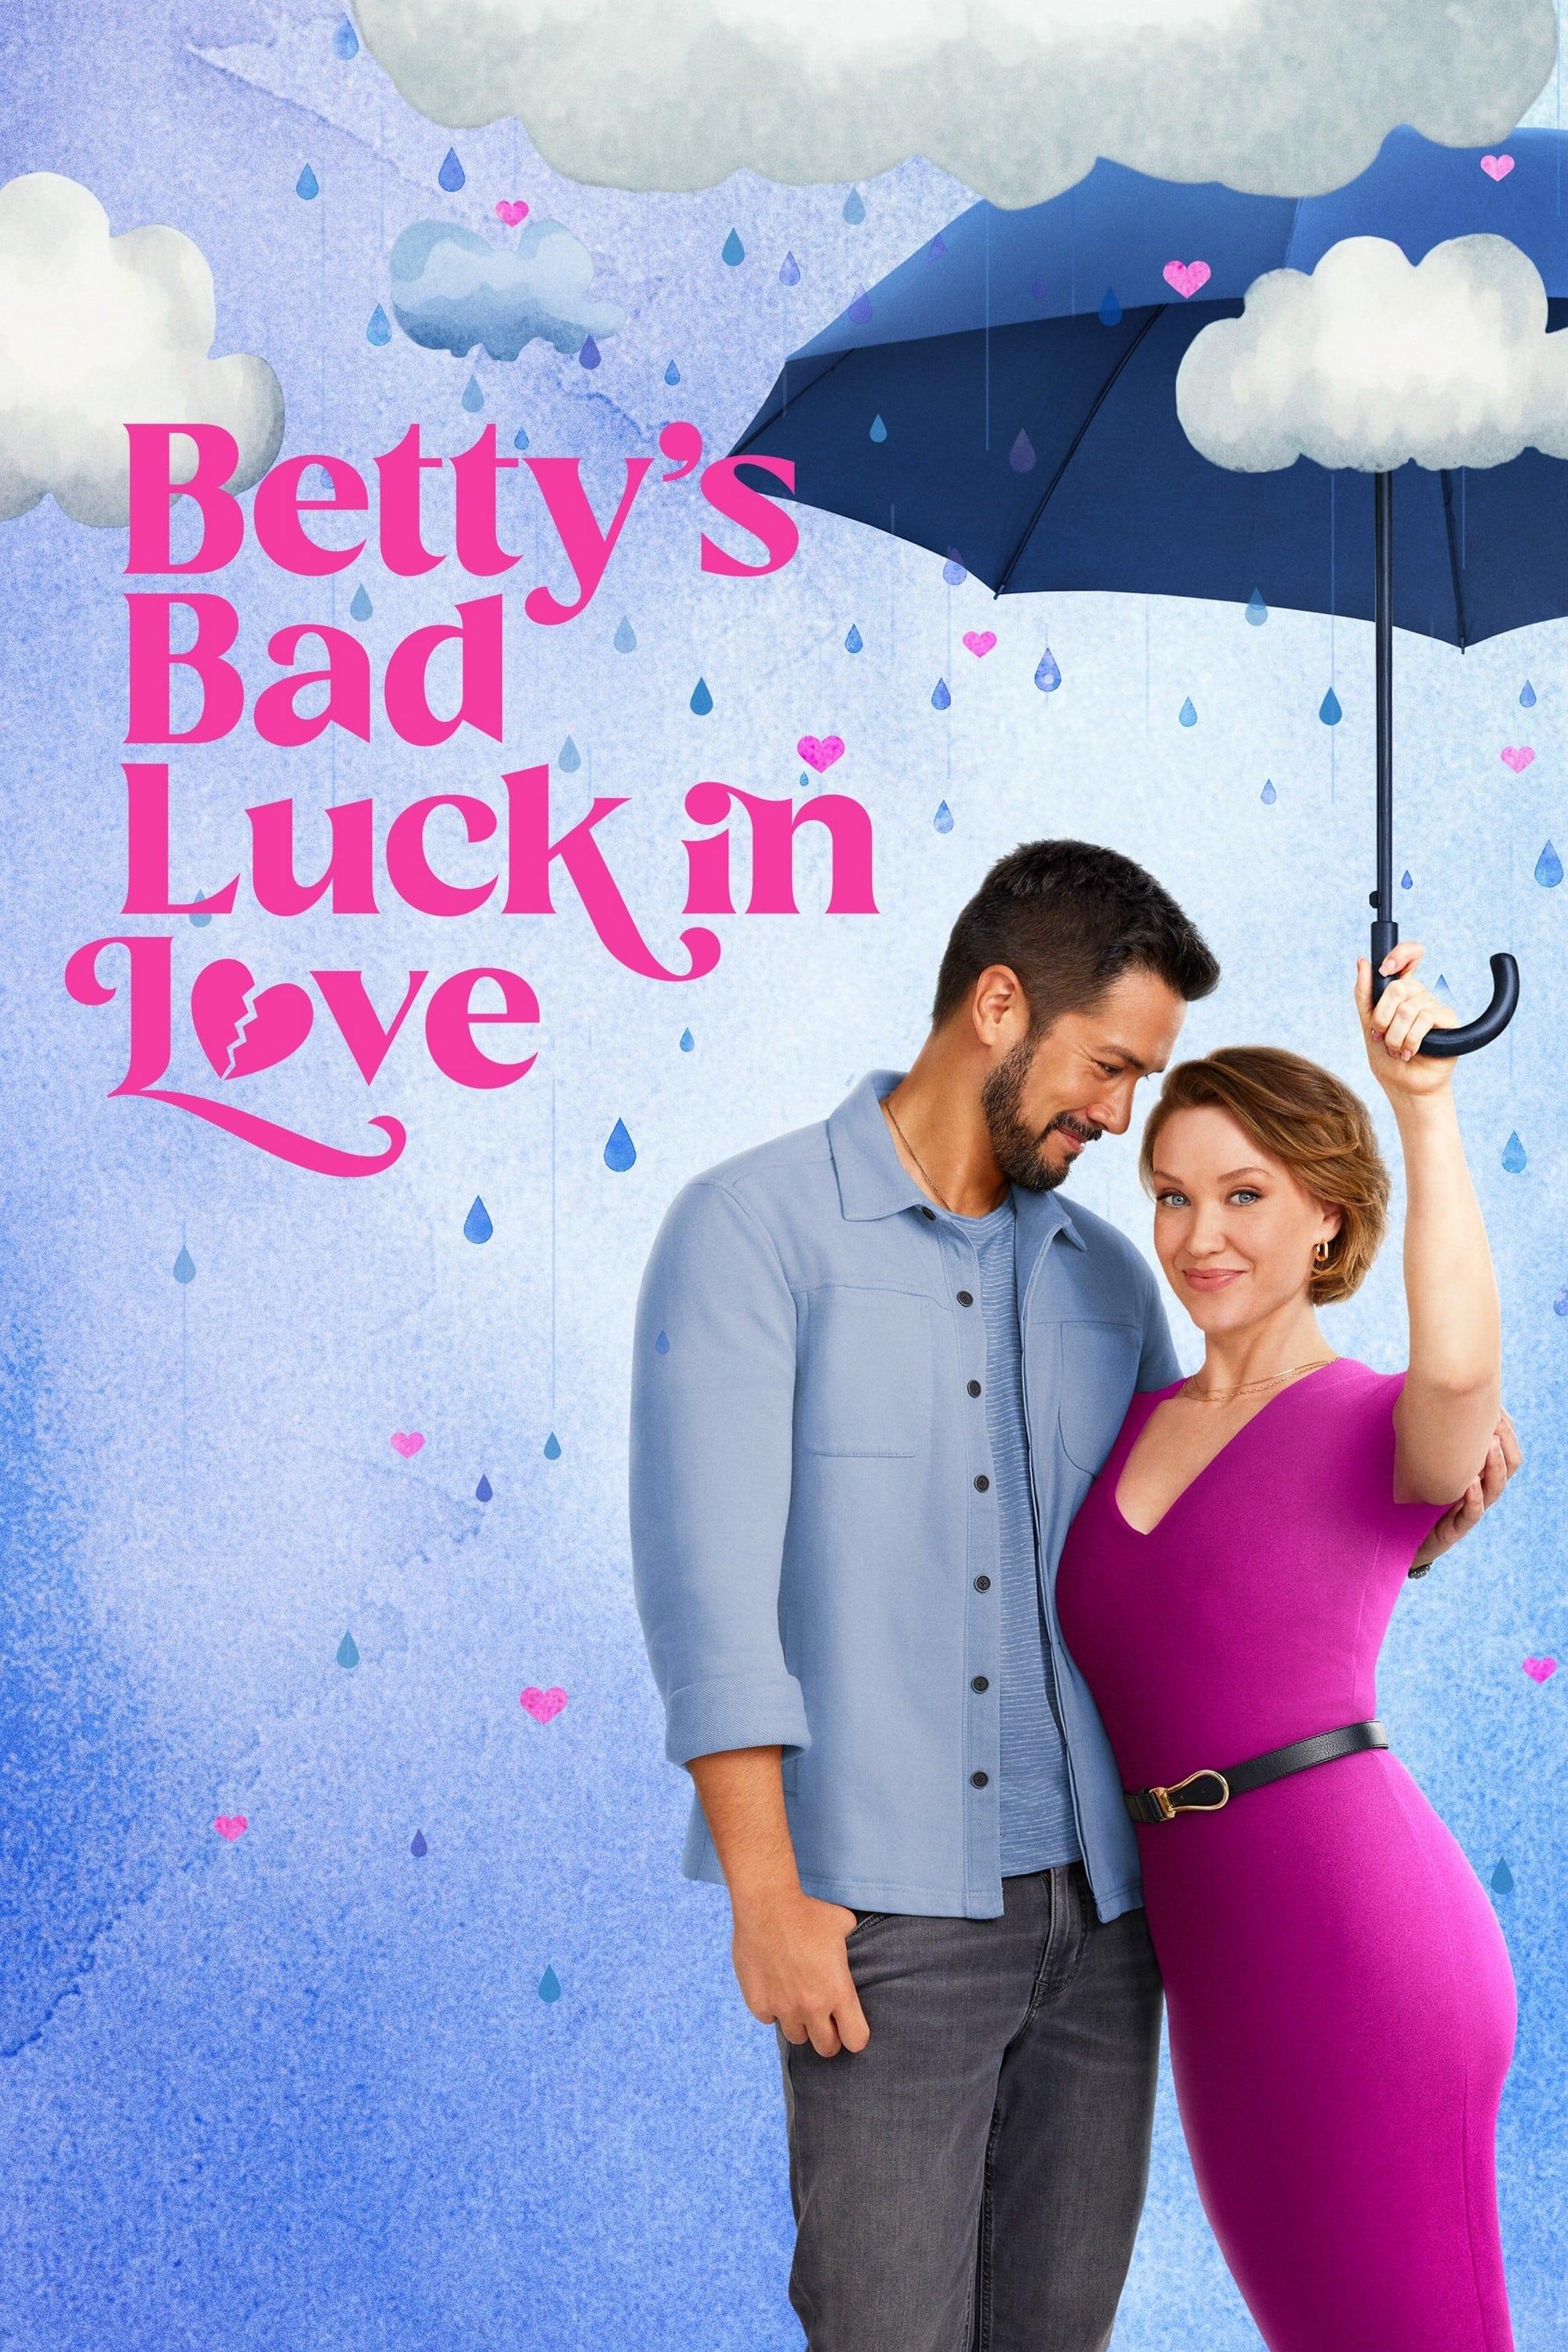 Betty's Bad Luck In Love poster